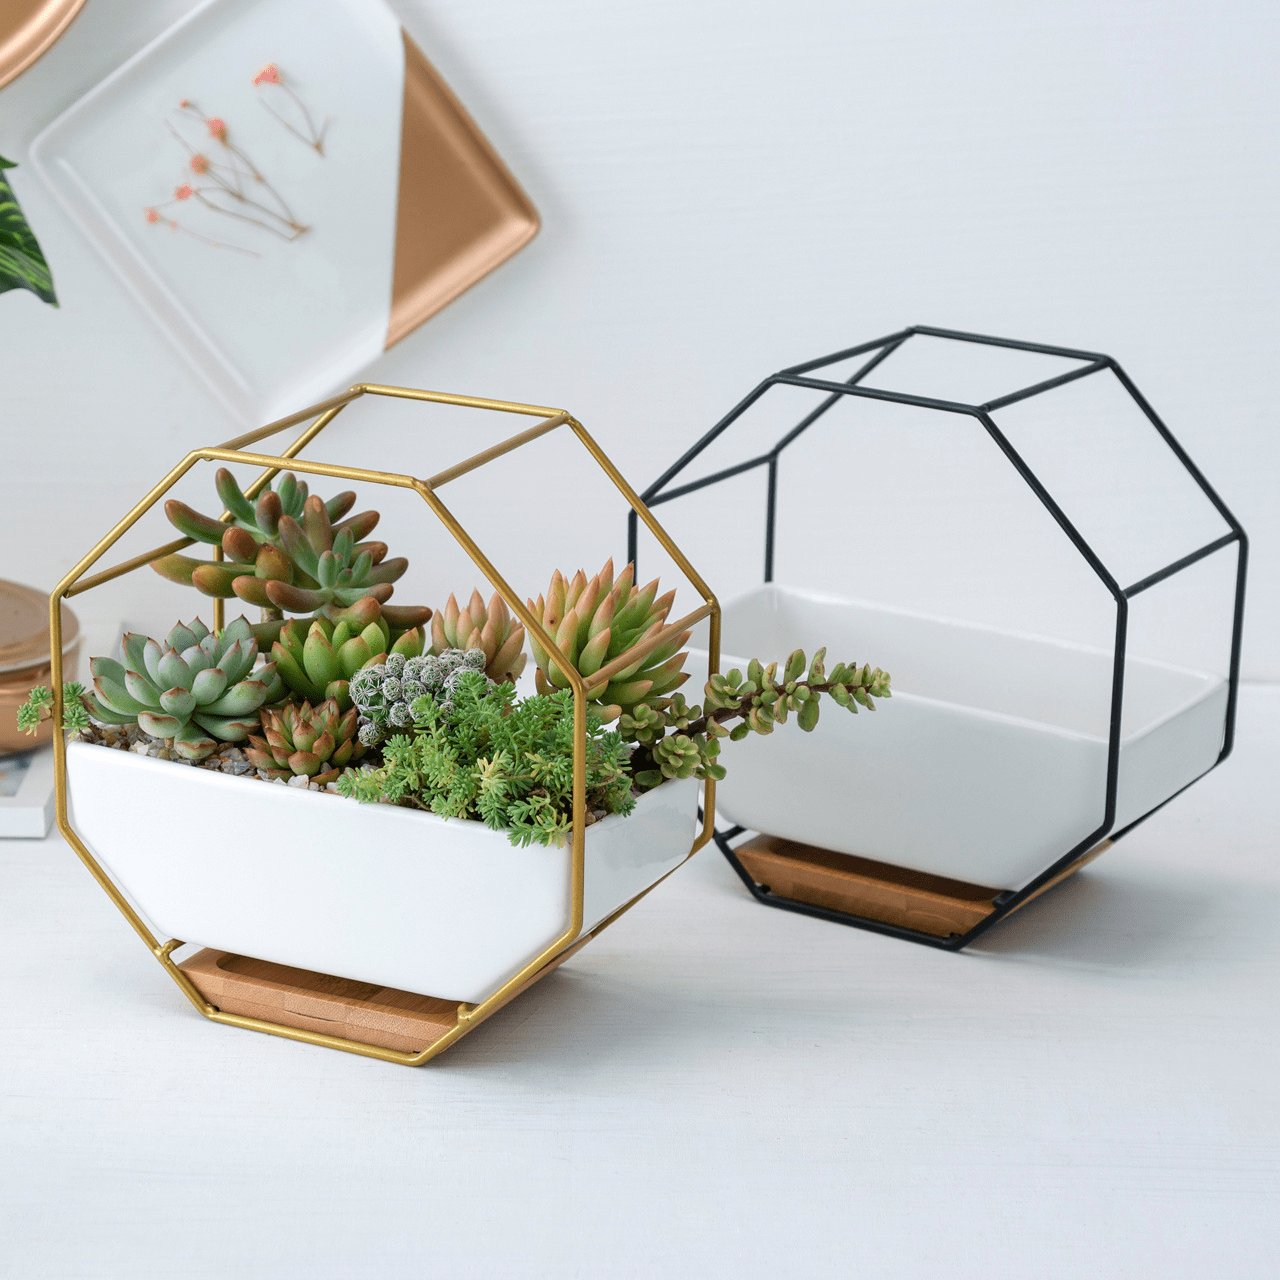 Nordic Octagonal Wall Hanging Vase - 1x Black + 1x Gold ($20 OFF) - Vases - HomeRelaxOfficial